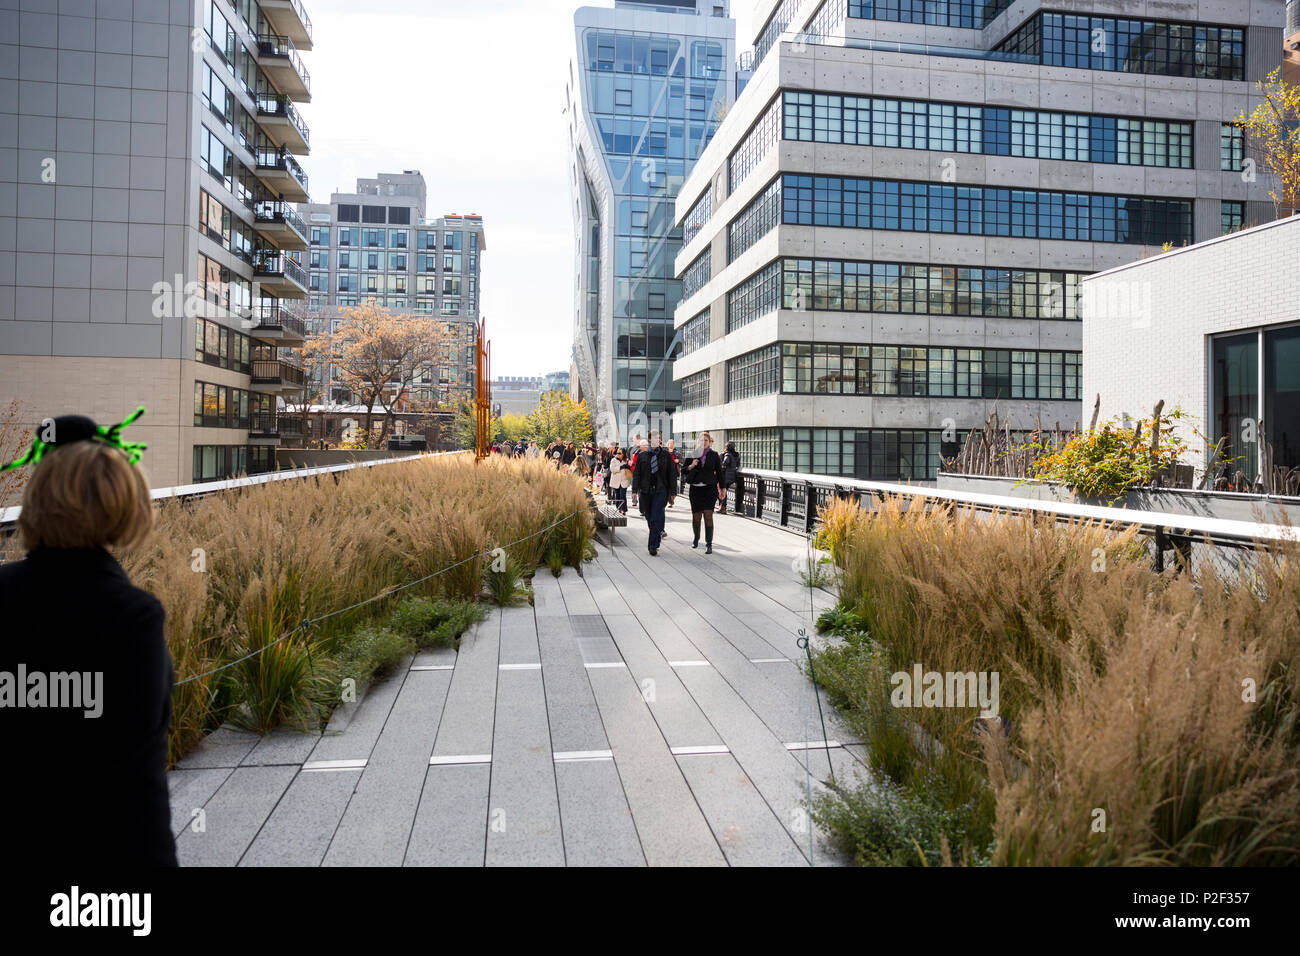 High line, park built on an elevated section of a disused railroad, downtown, Manhattan, New York City, USA, America Stock Photo